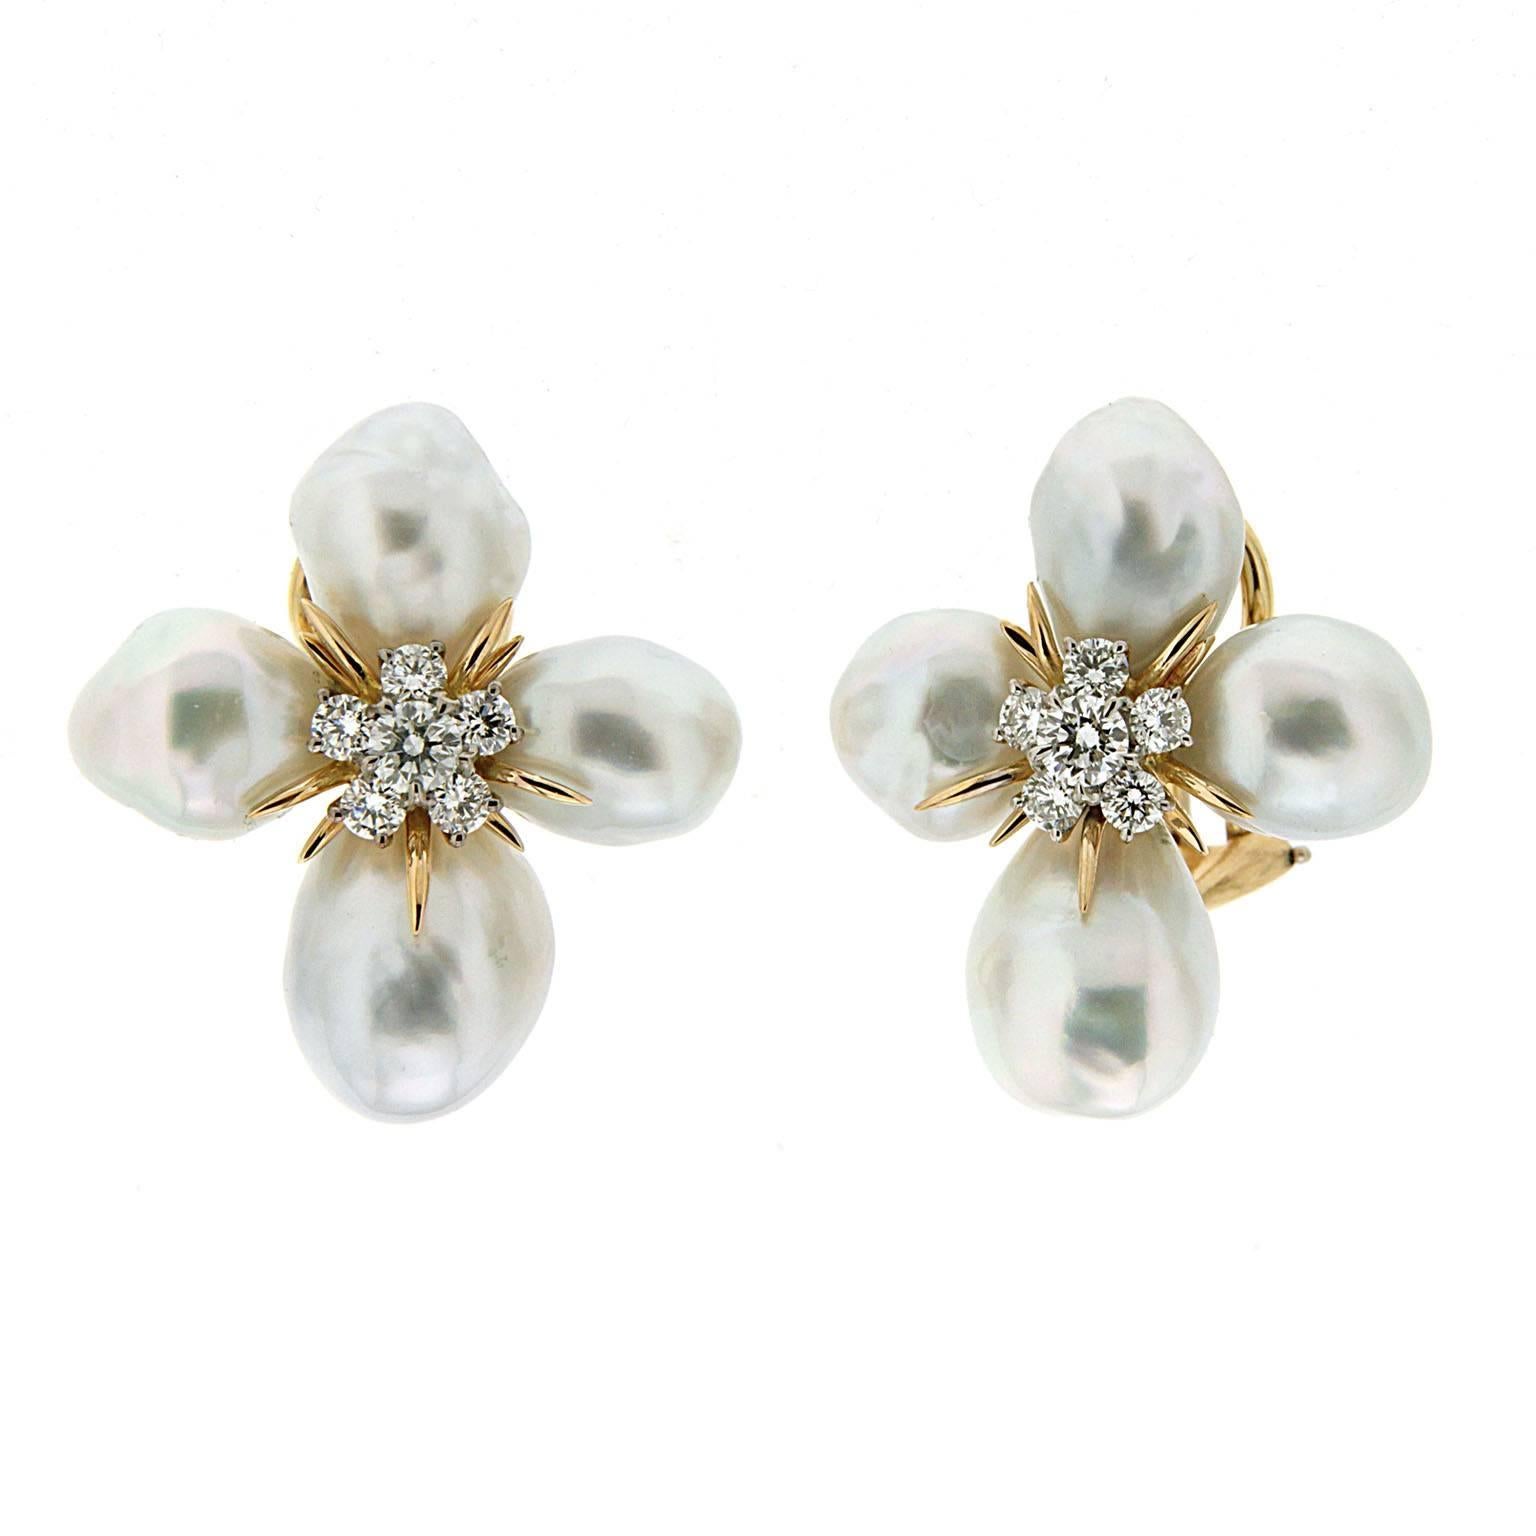 Baroque Pearl Flower Cluster Earrings with Diamonds